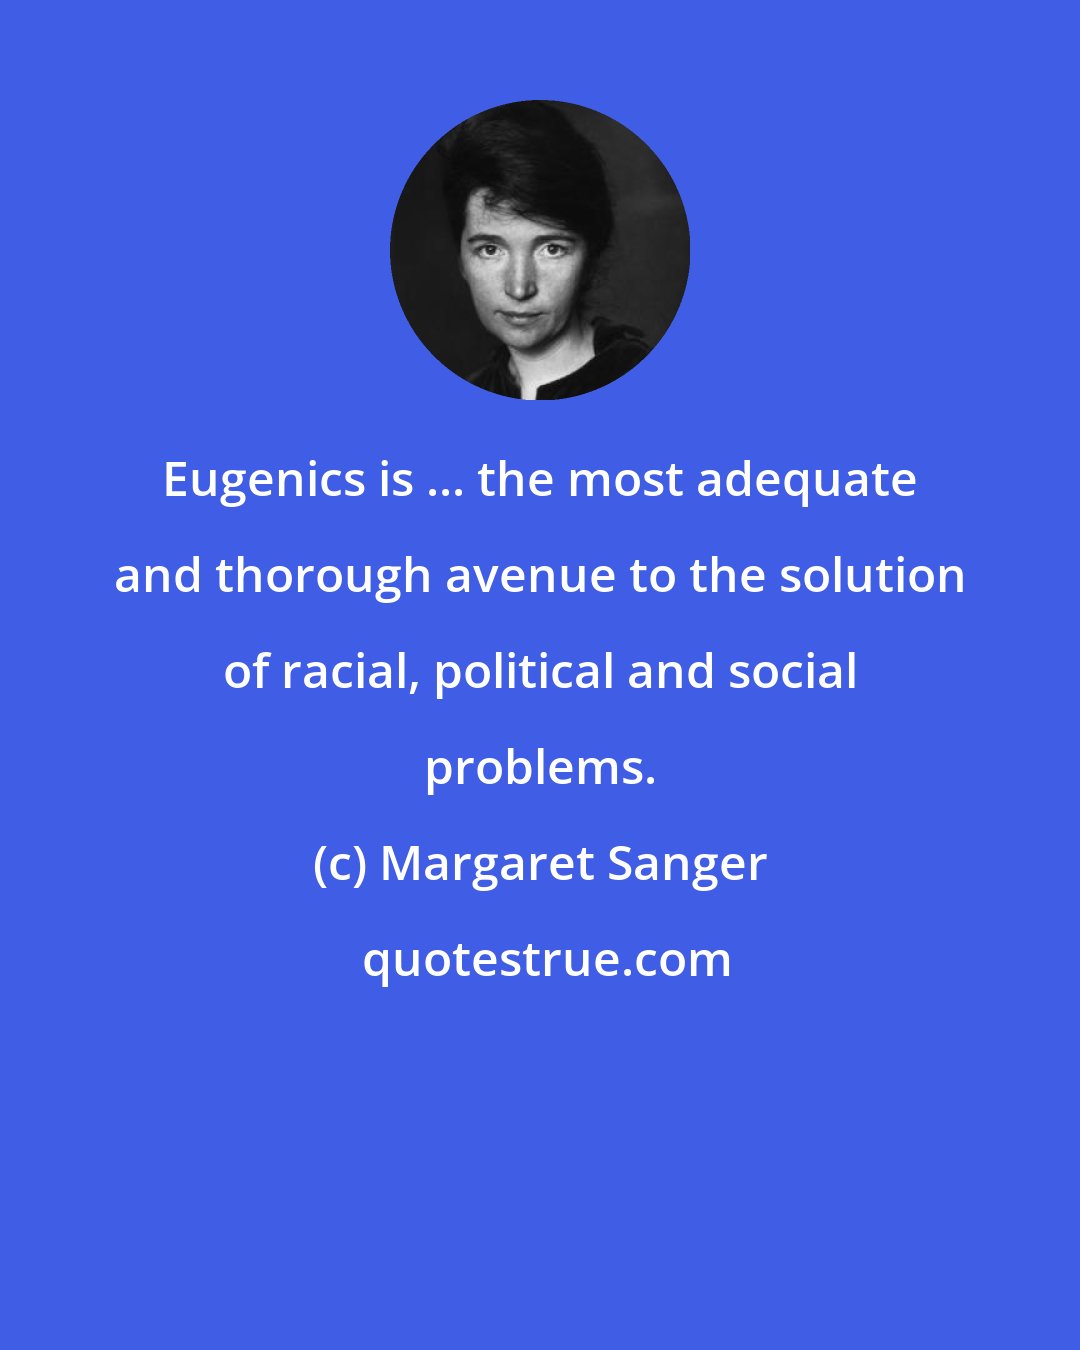 Margaret Sanger: Eugenics is ... the most adequate and thorough avenue to the solution of racial, political and social problems.